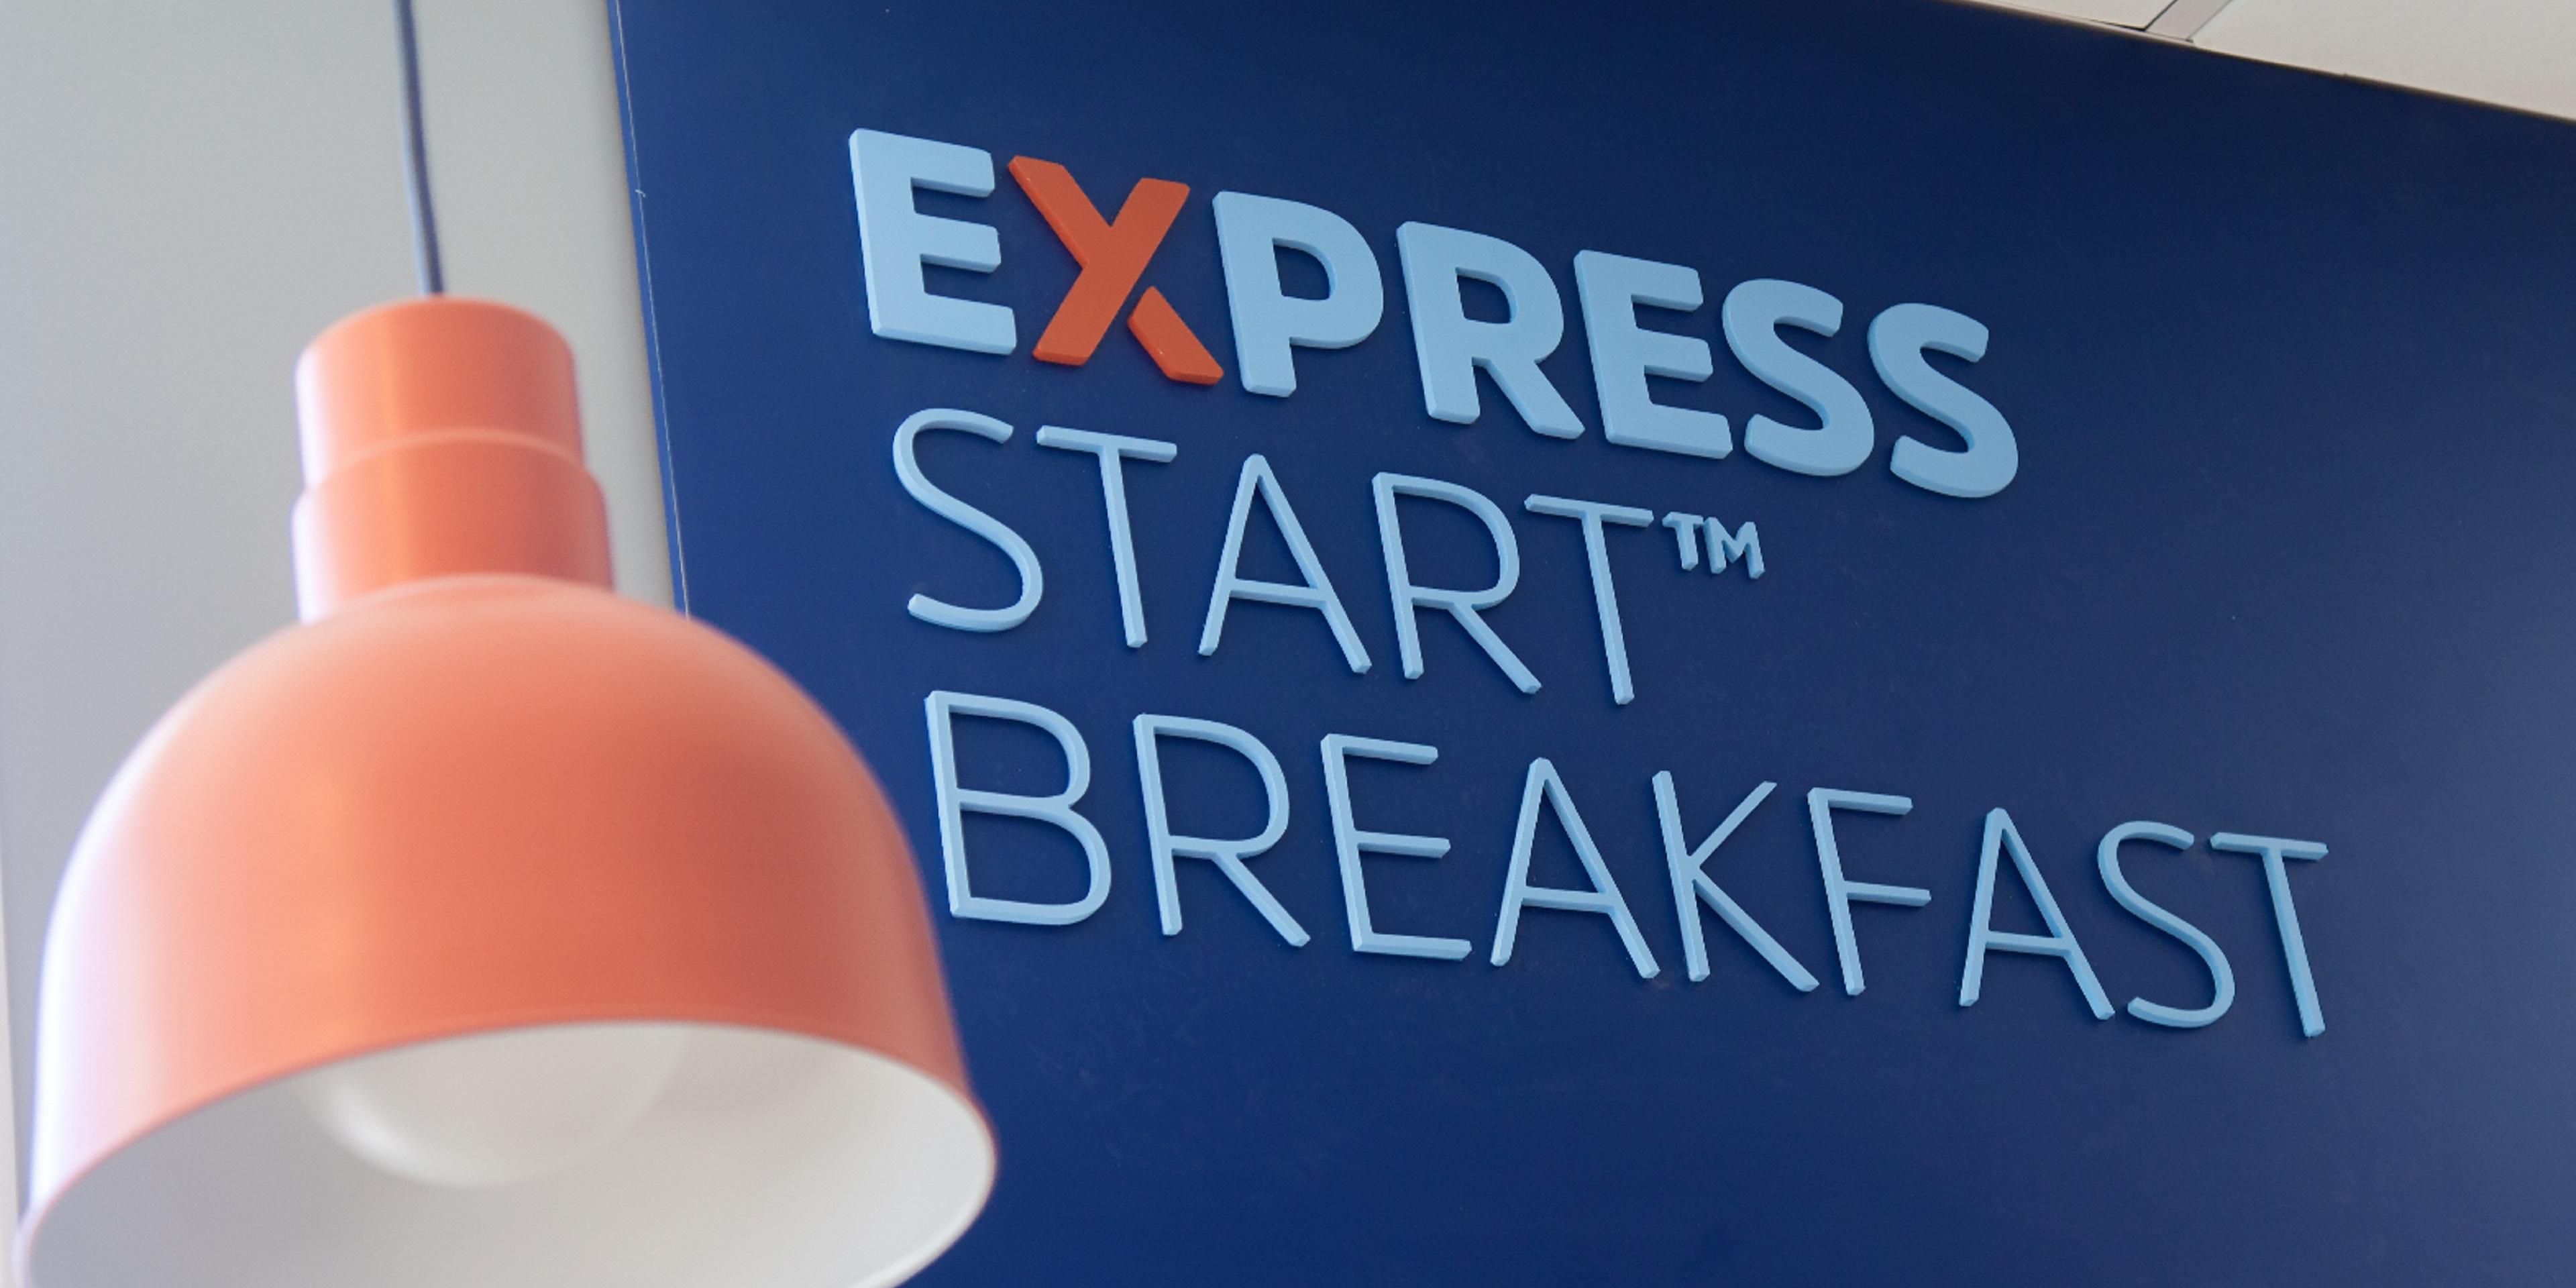 Kick start your day with our Express Start Breakfast, with grab ‘n’ go options and favorites such as eggs and bacon, our signature cinnamon rolls and fresh coffee. Offered from 6:30 AM - 9:00 AM on Monday-Friday and 7:00 AM - 10:00 AM on Saturday and Sunday.